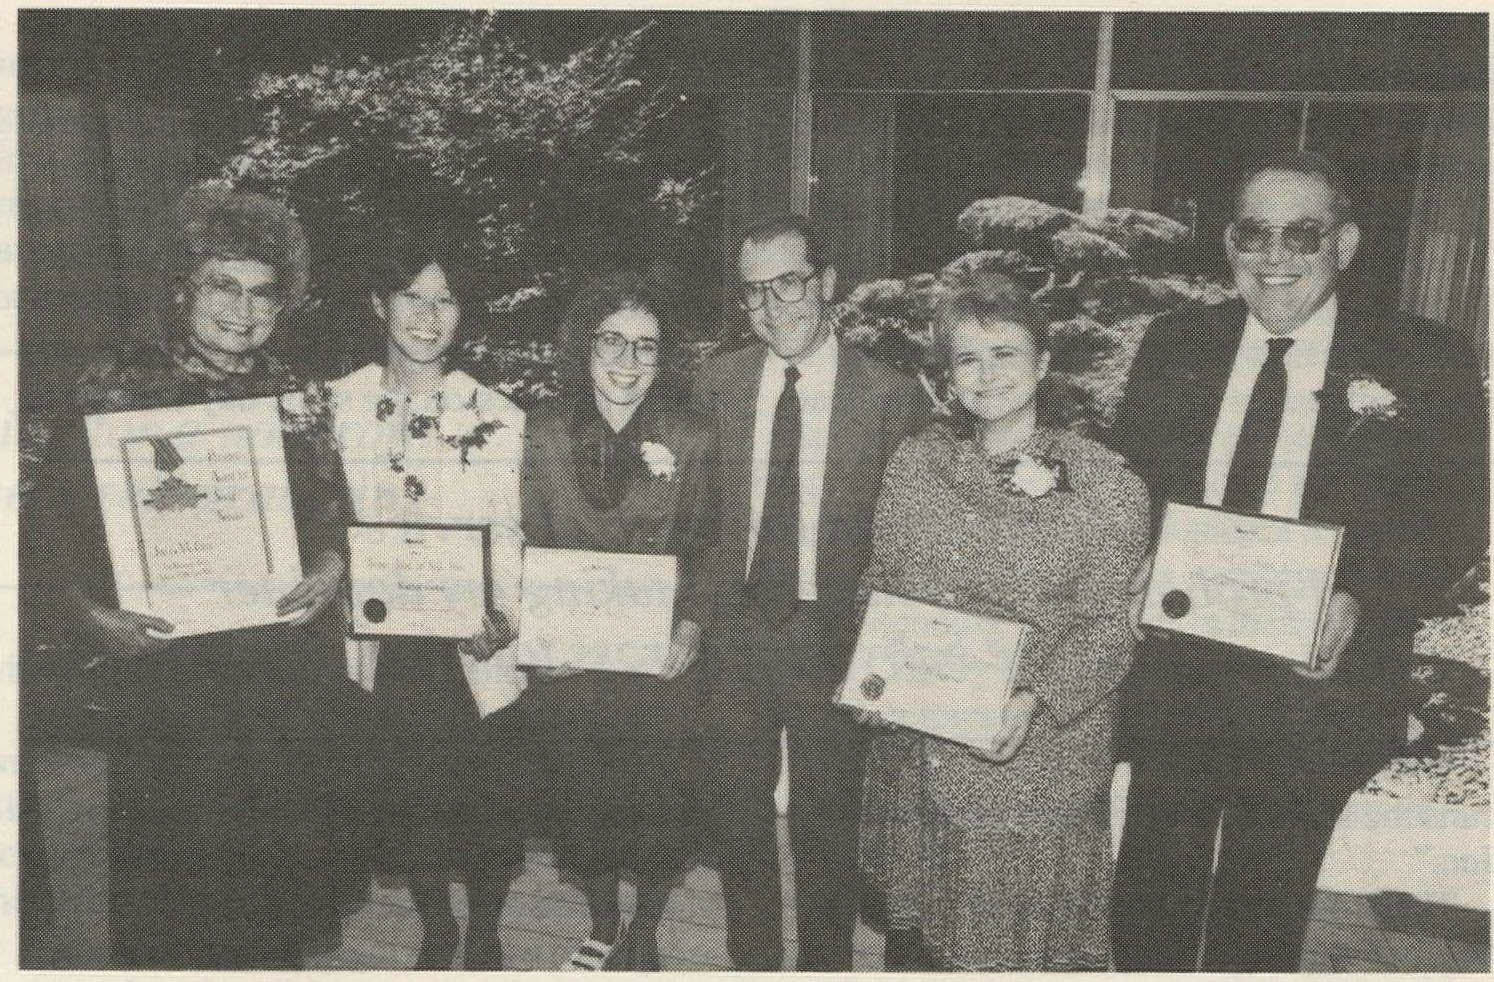 Six people in business attire stand in a line facing the camera. Four are women, two are men. Five of the people are holding a framed certificate, four are identical. The woman on the left most holds a unique certificate that is bigger and more elaborate.